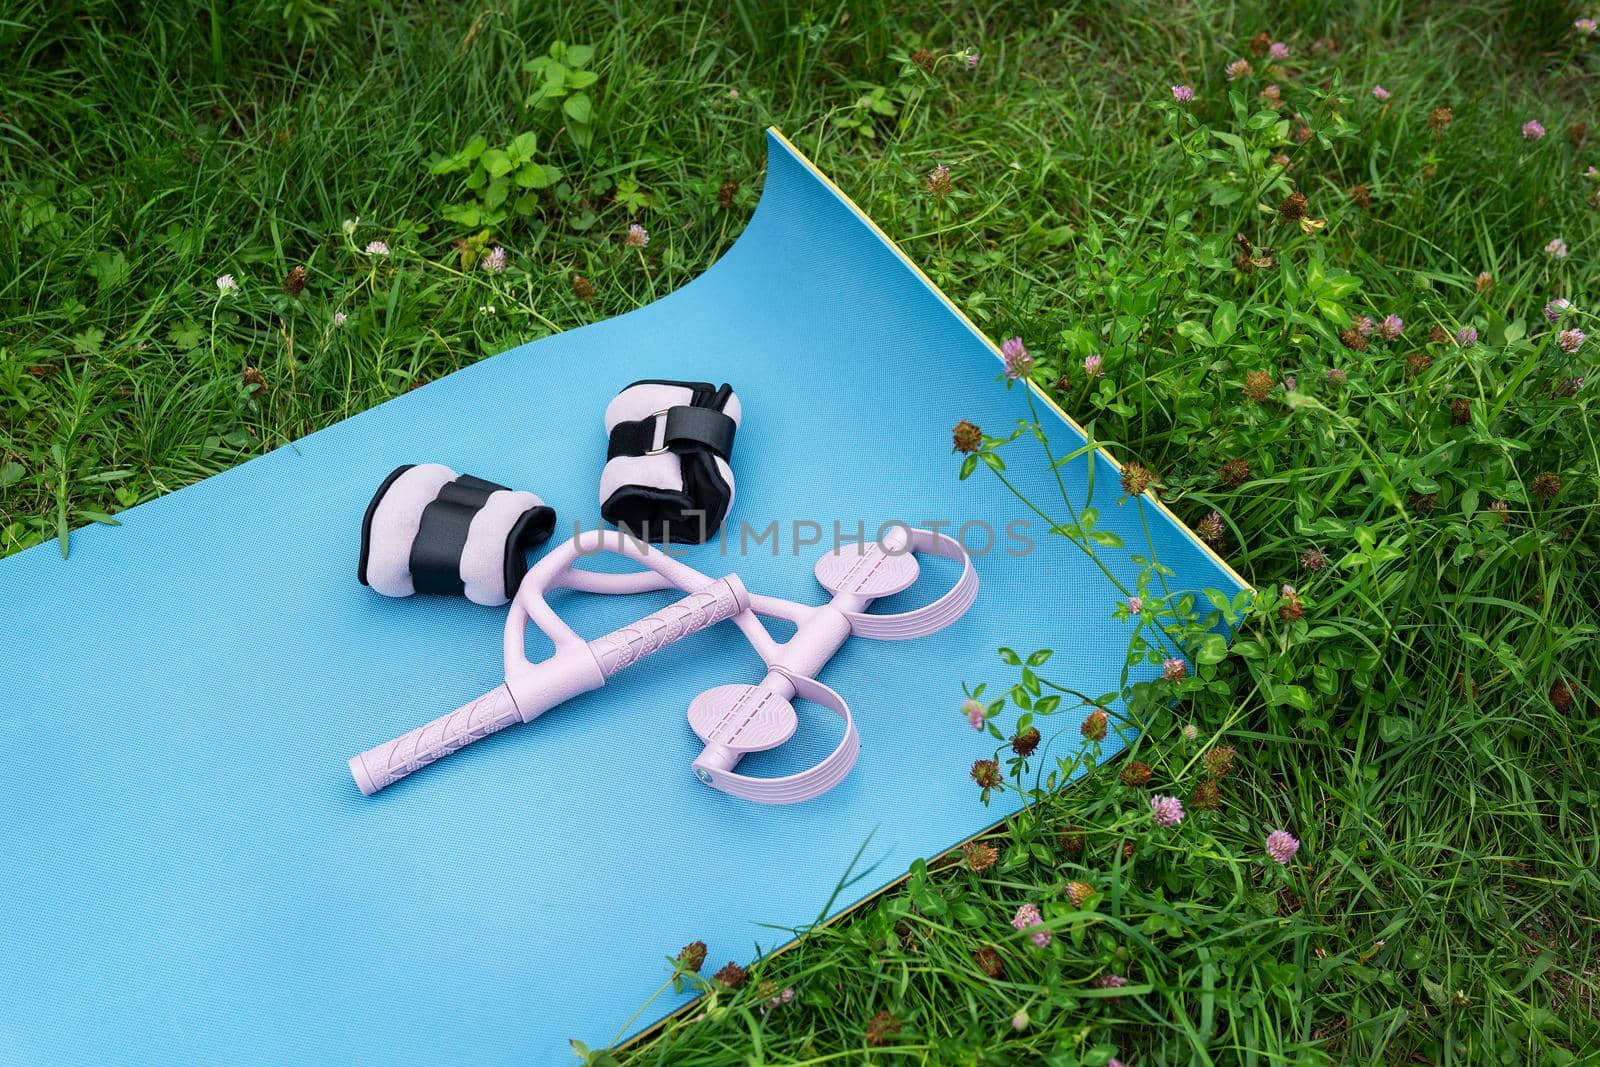 Outdoor activities, yoga mat with weights and massager. Sports in nature outdoors